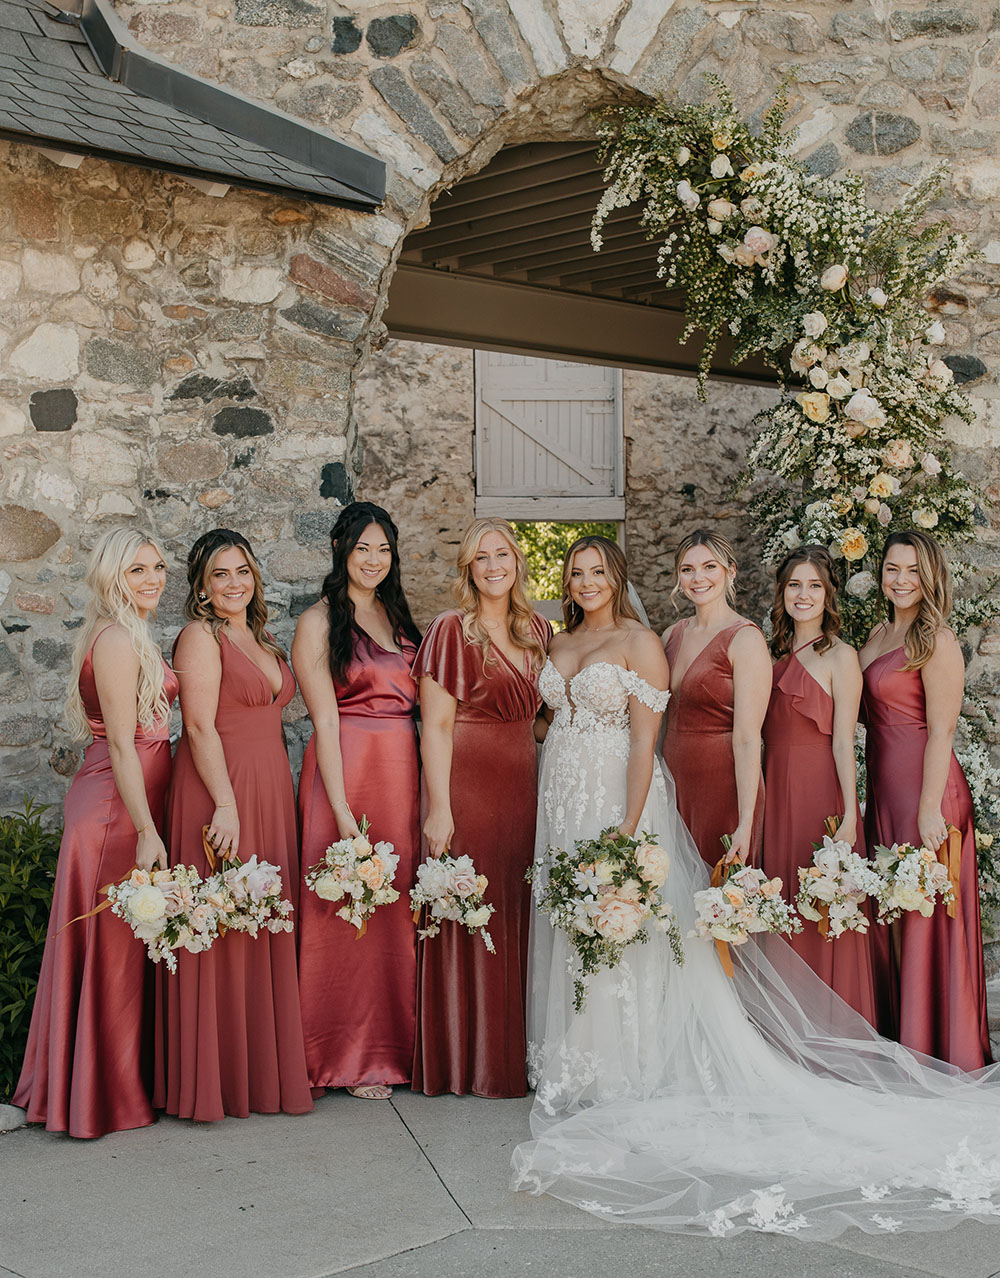 Mismatched bridesmaid dresses from Jenny Yoo in an English Rose color